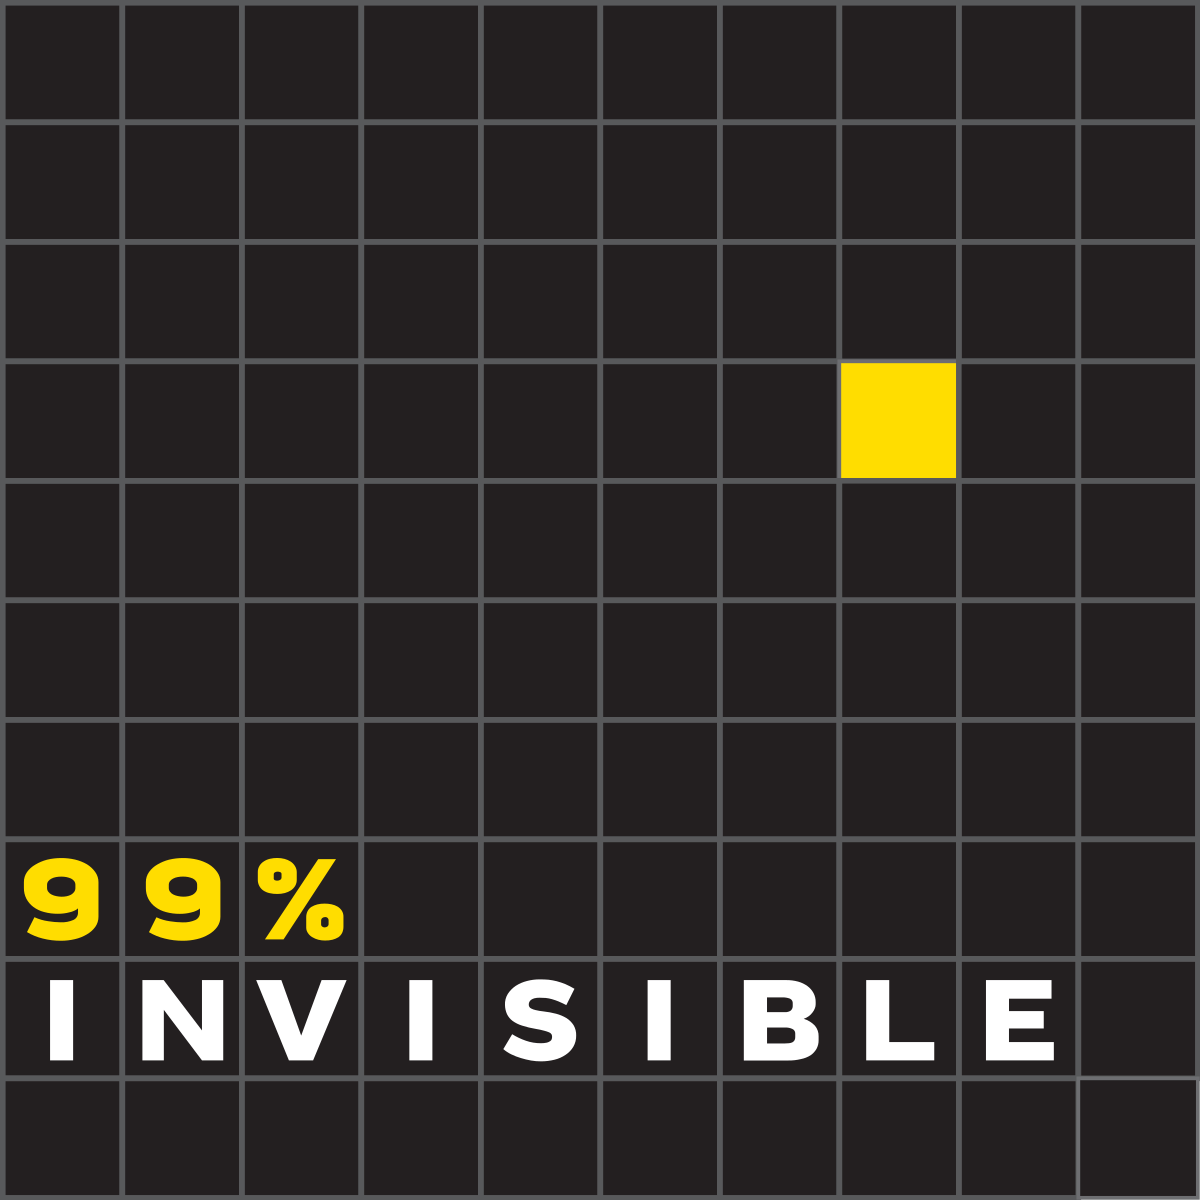 The 99% Invisible podcast is hosted by Roman Mars. 